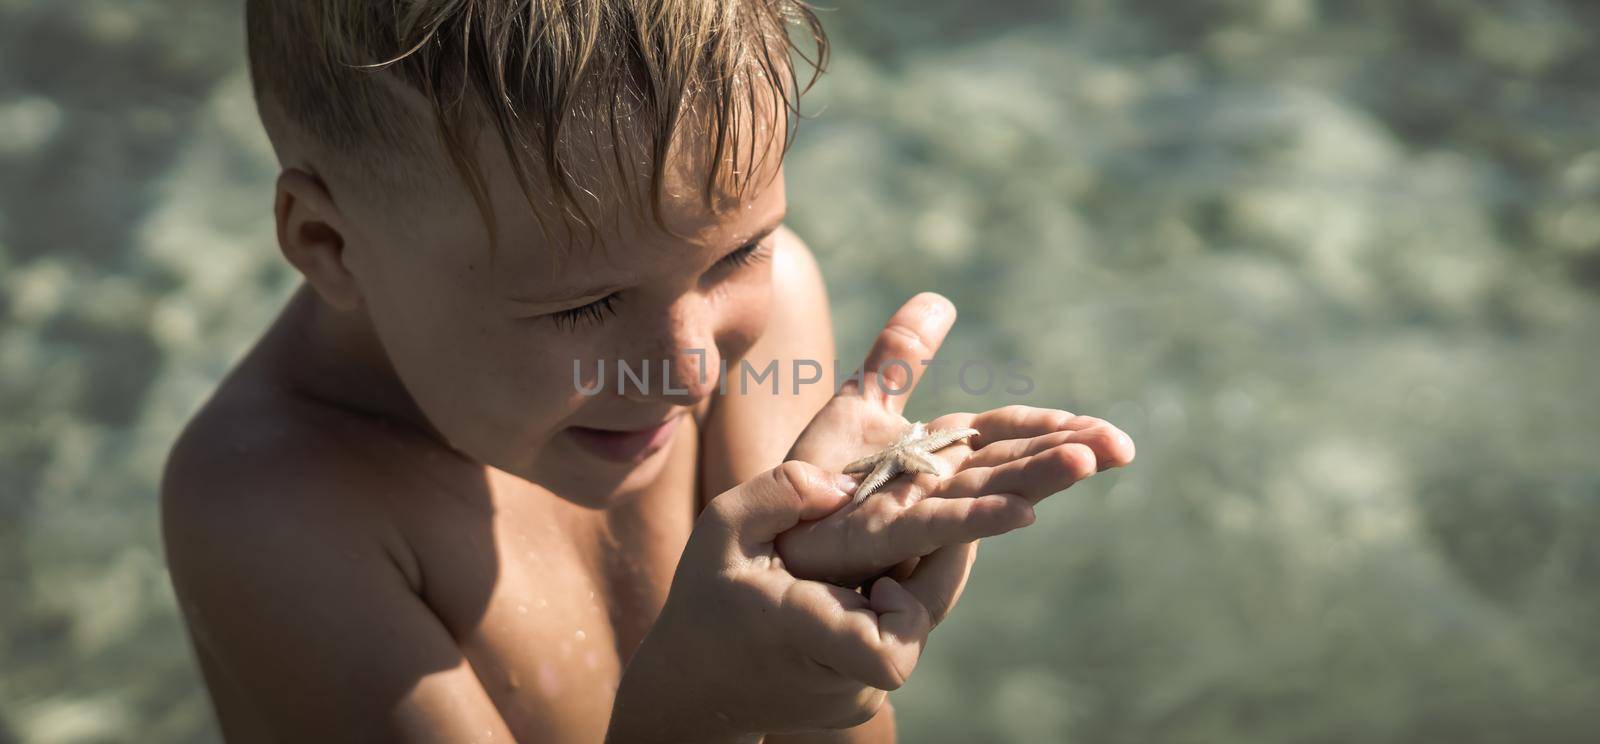 BANNER Copy space. Close side lifestyle portrait boy carefully thoughtful surprise facial expression look at white little starfish on palm. Day sun sea. Childhood learn new interest kid tourism happy.